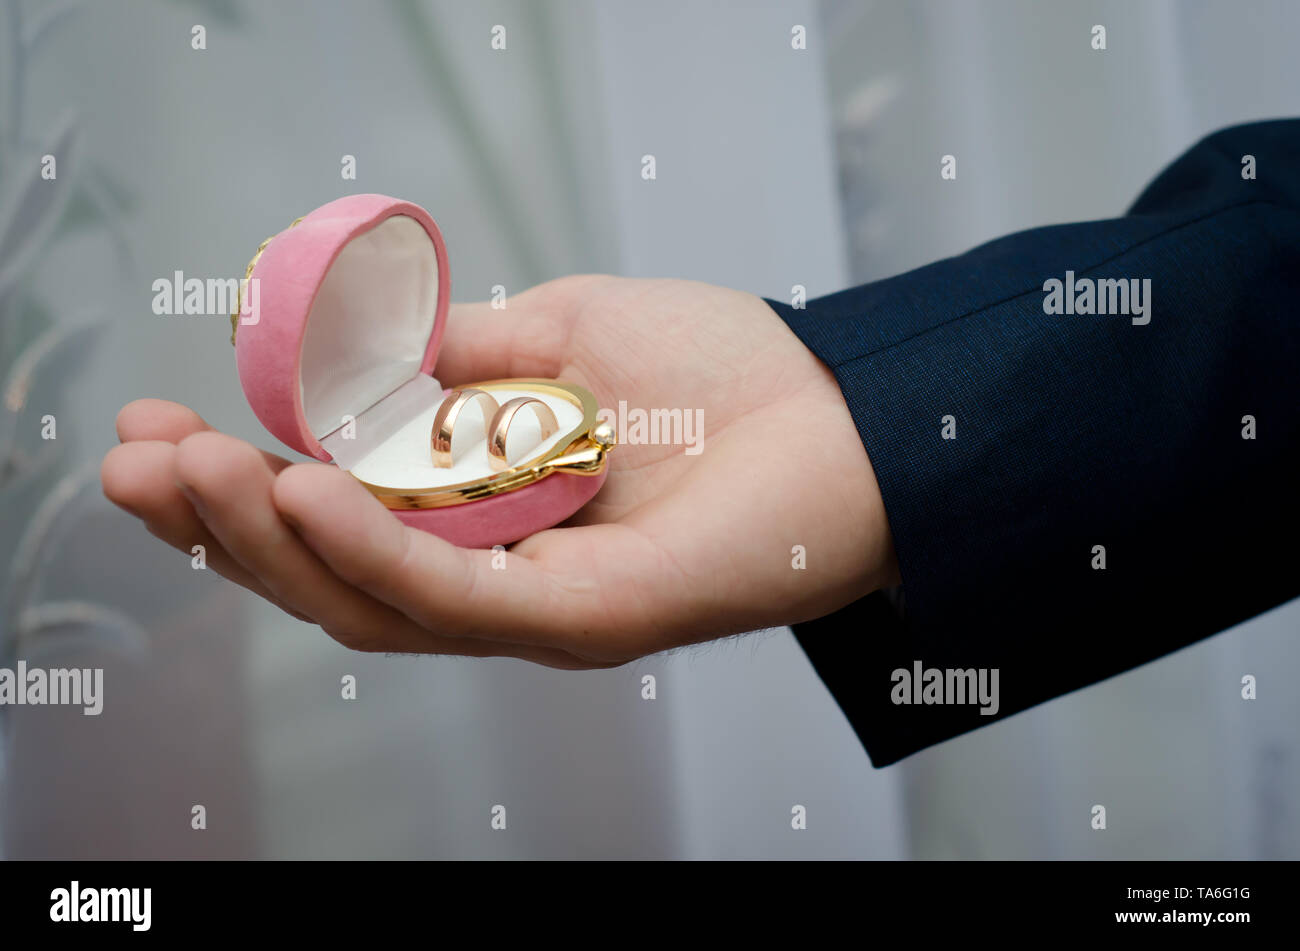 Pink velvet box with wedding rings in the hand of the groom on the wedding day Stock Photo